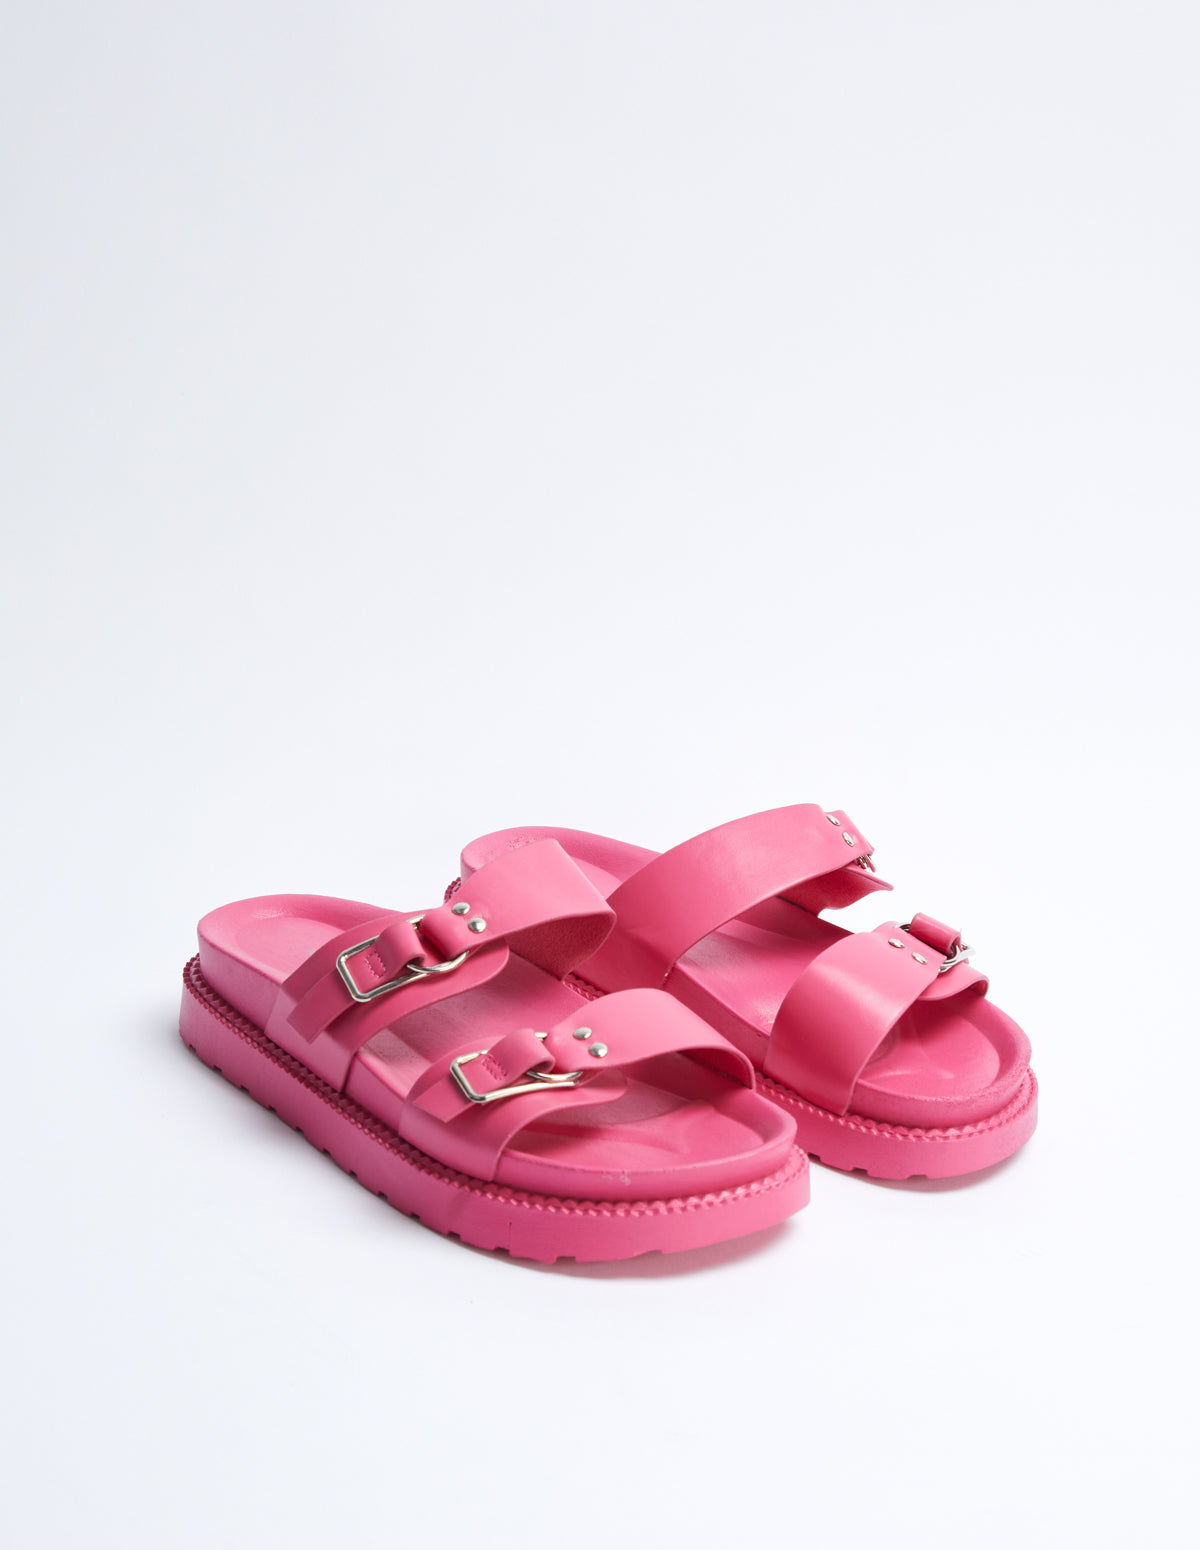 Two Strap Buckle Sandals - Mar